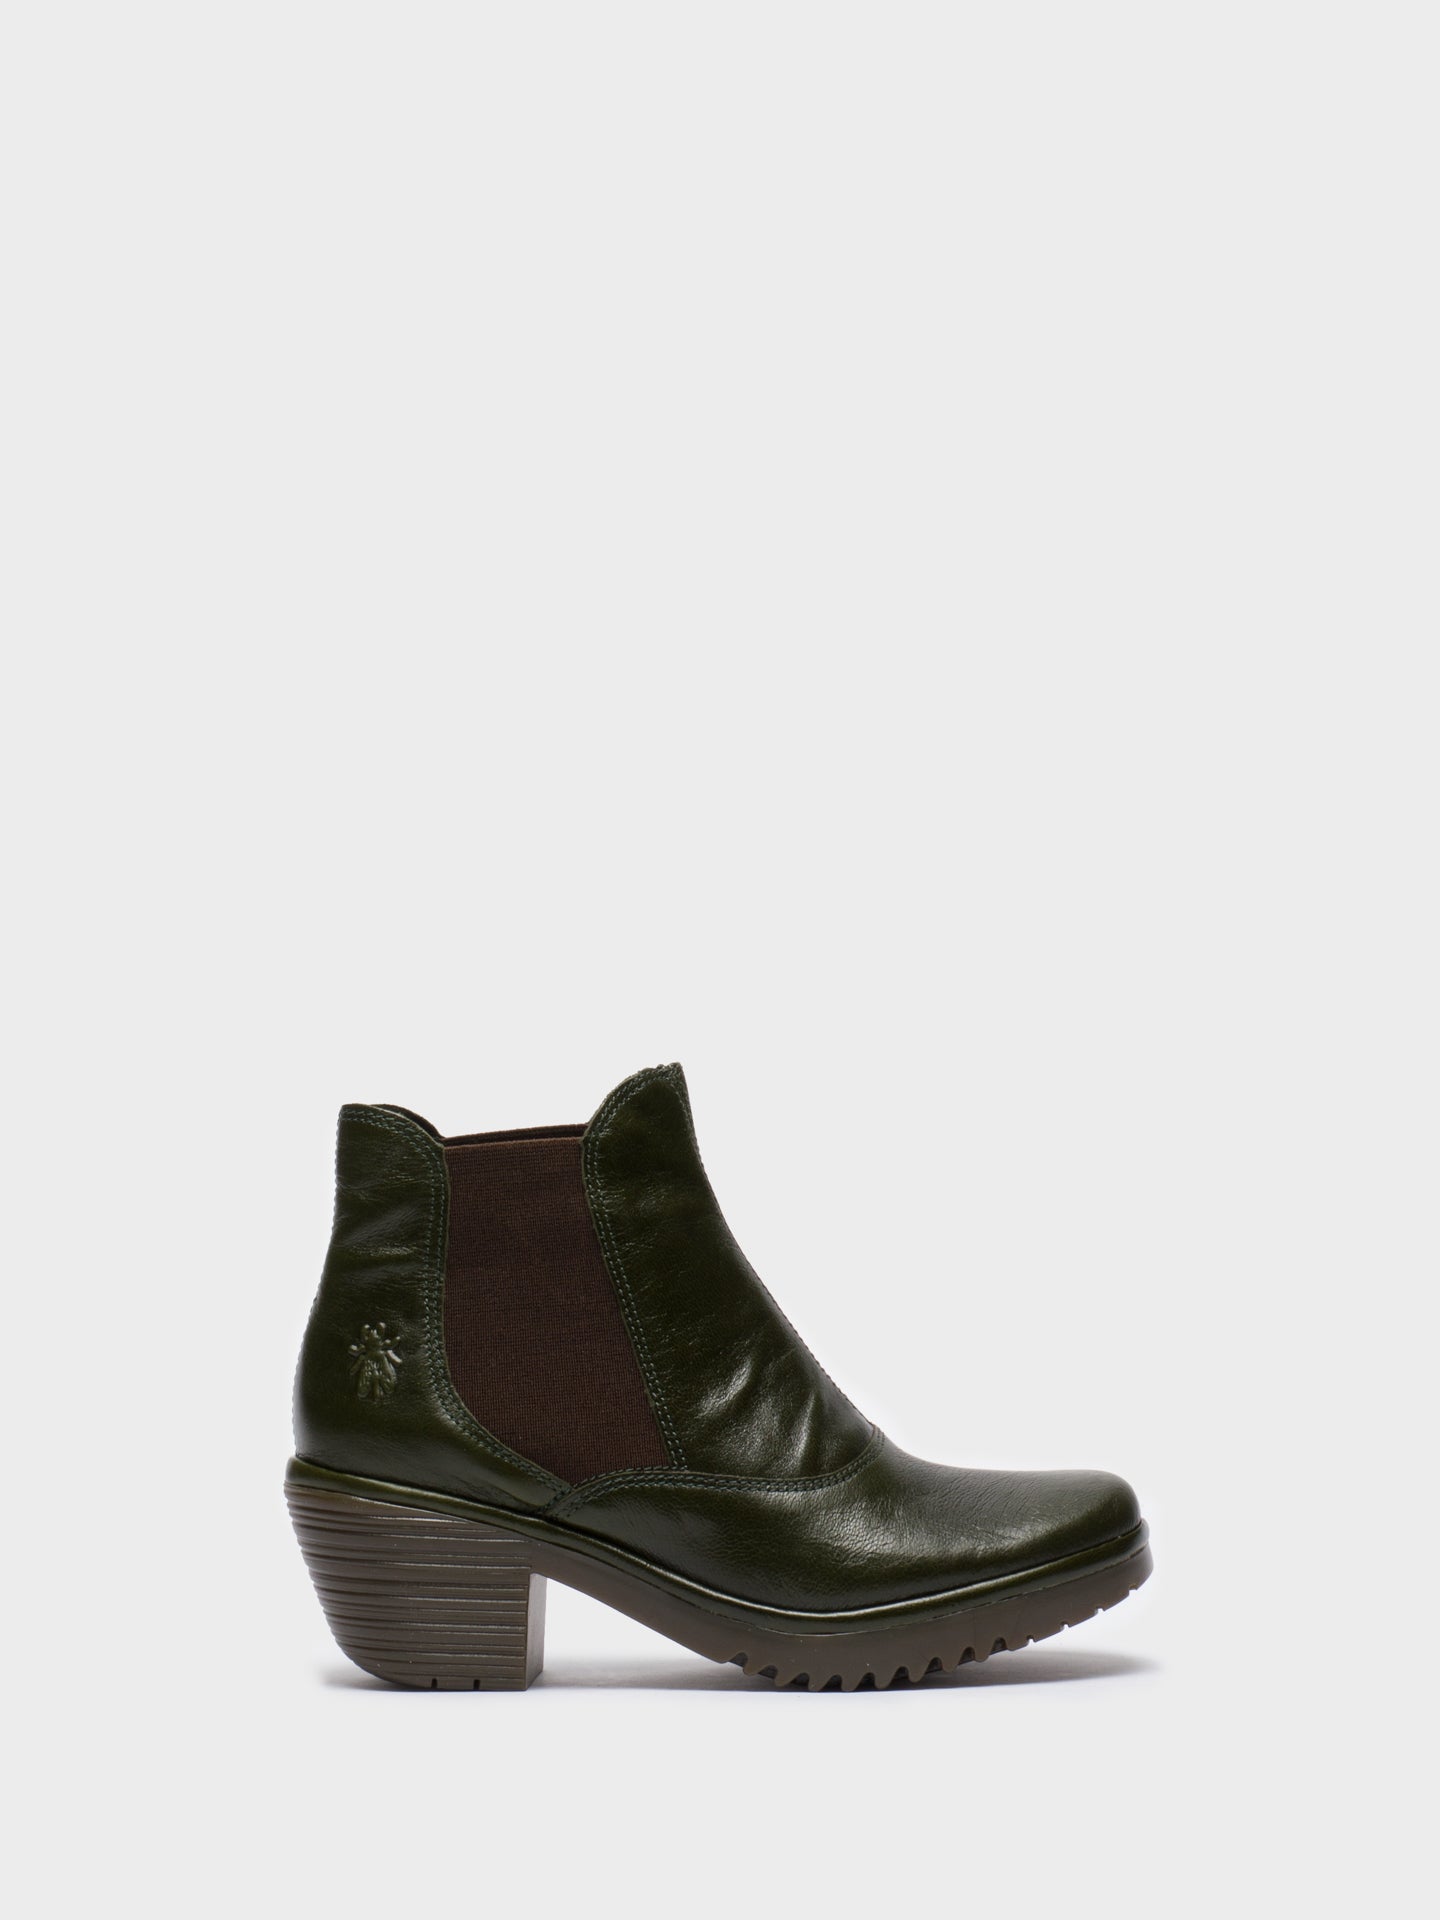 Fly London Green Chelsea Ankle Boots